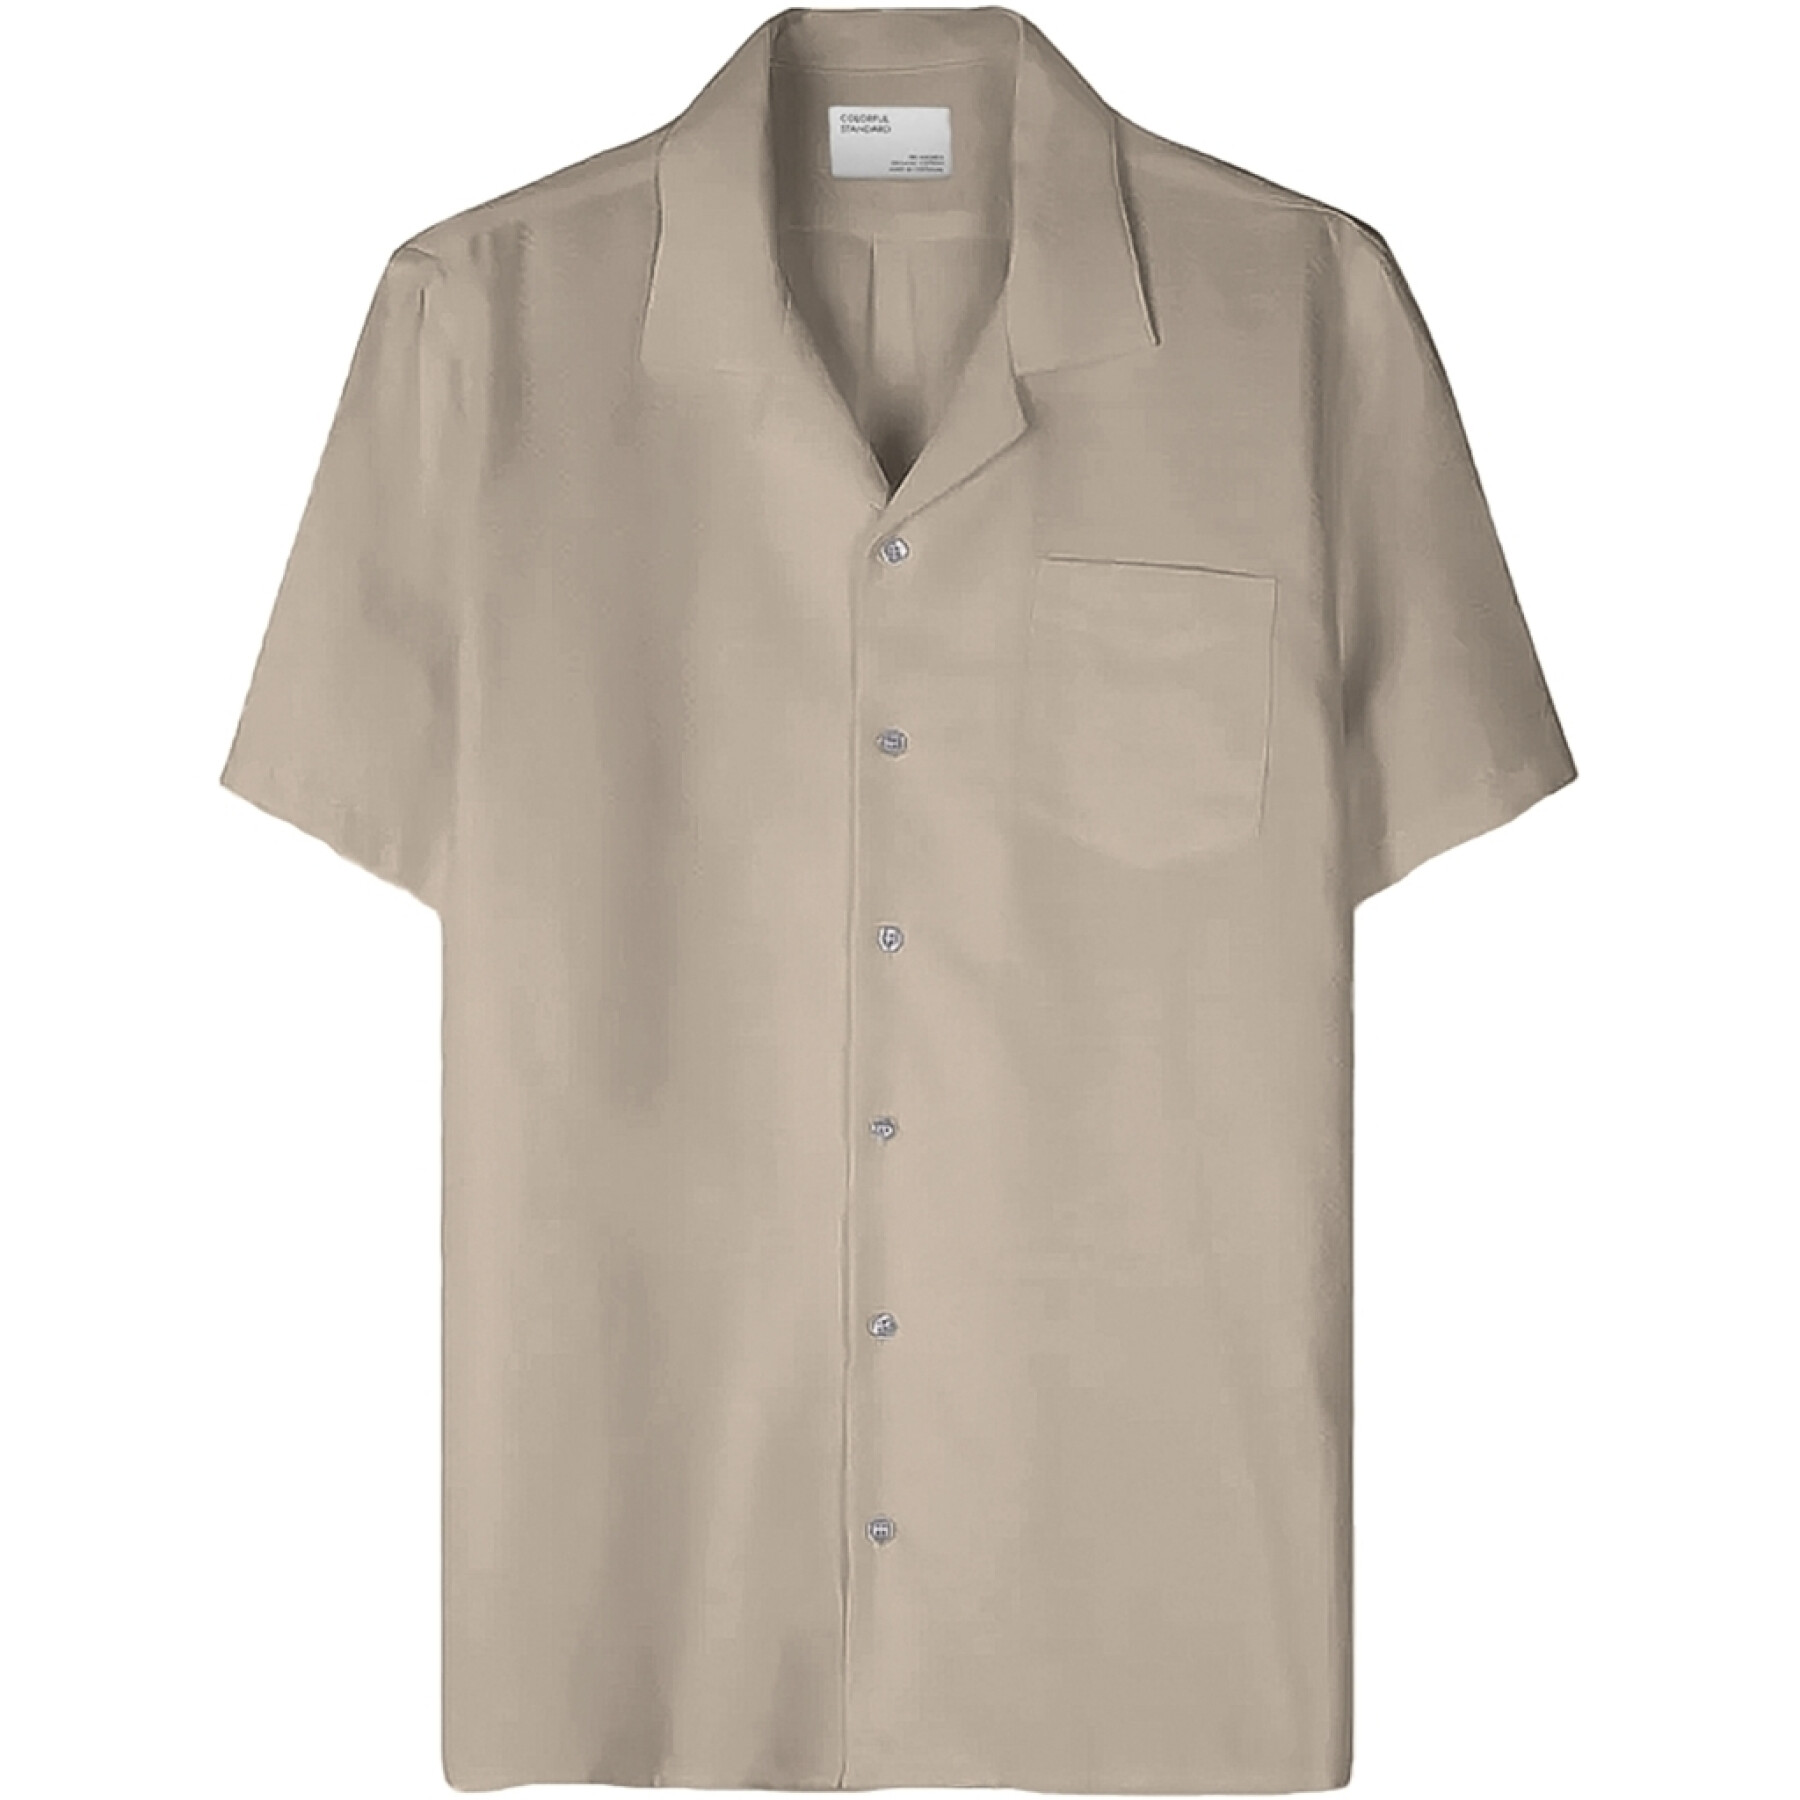 Shirt Colorful Standard Oyster Grey